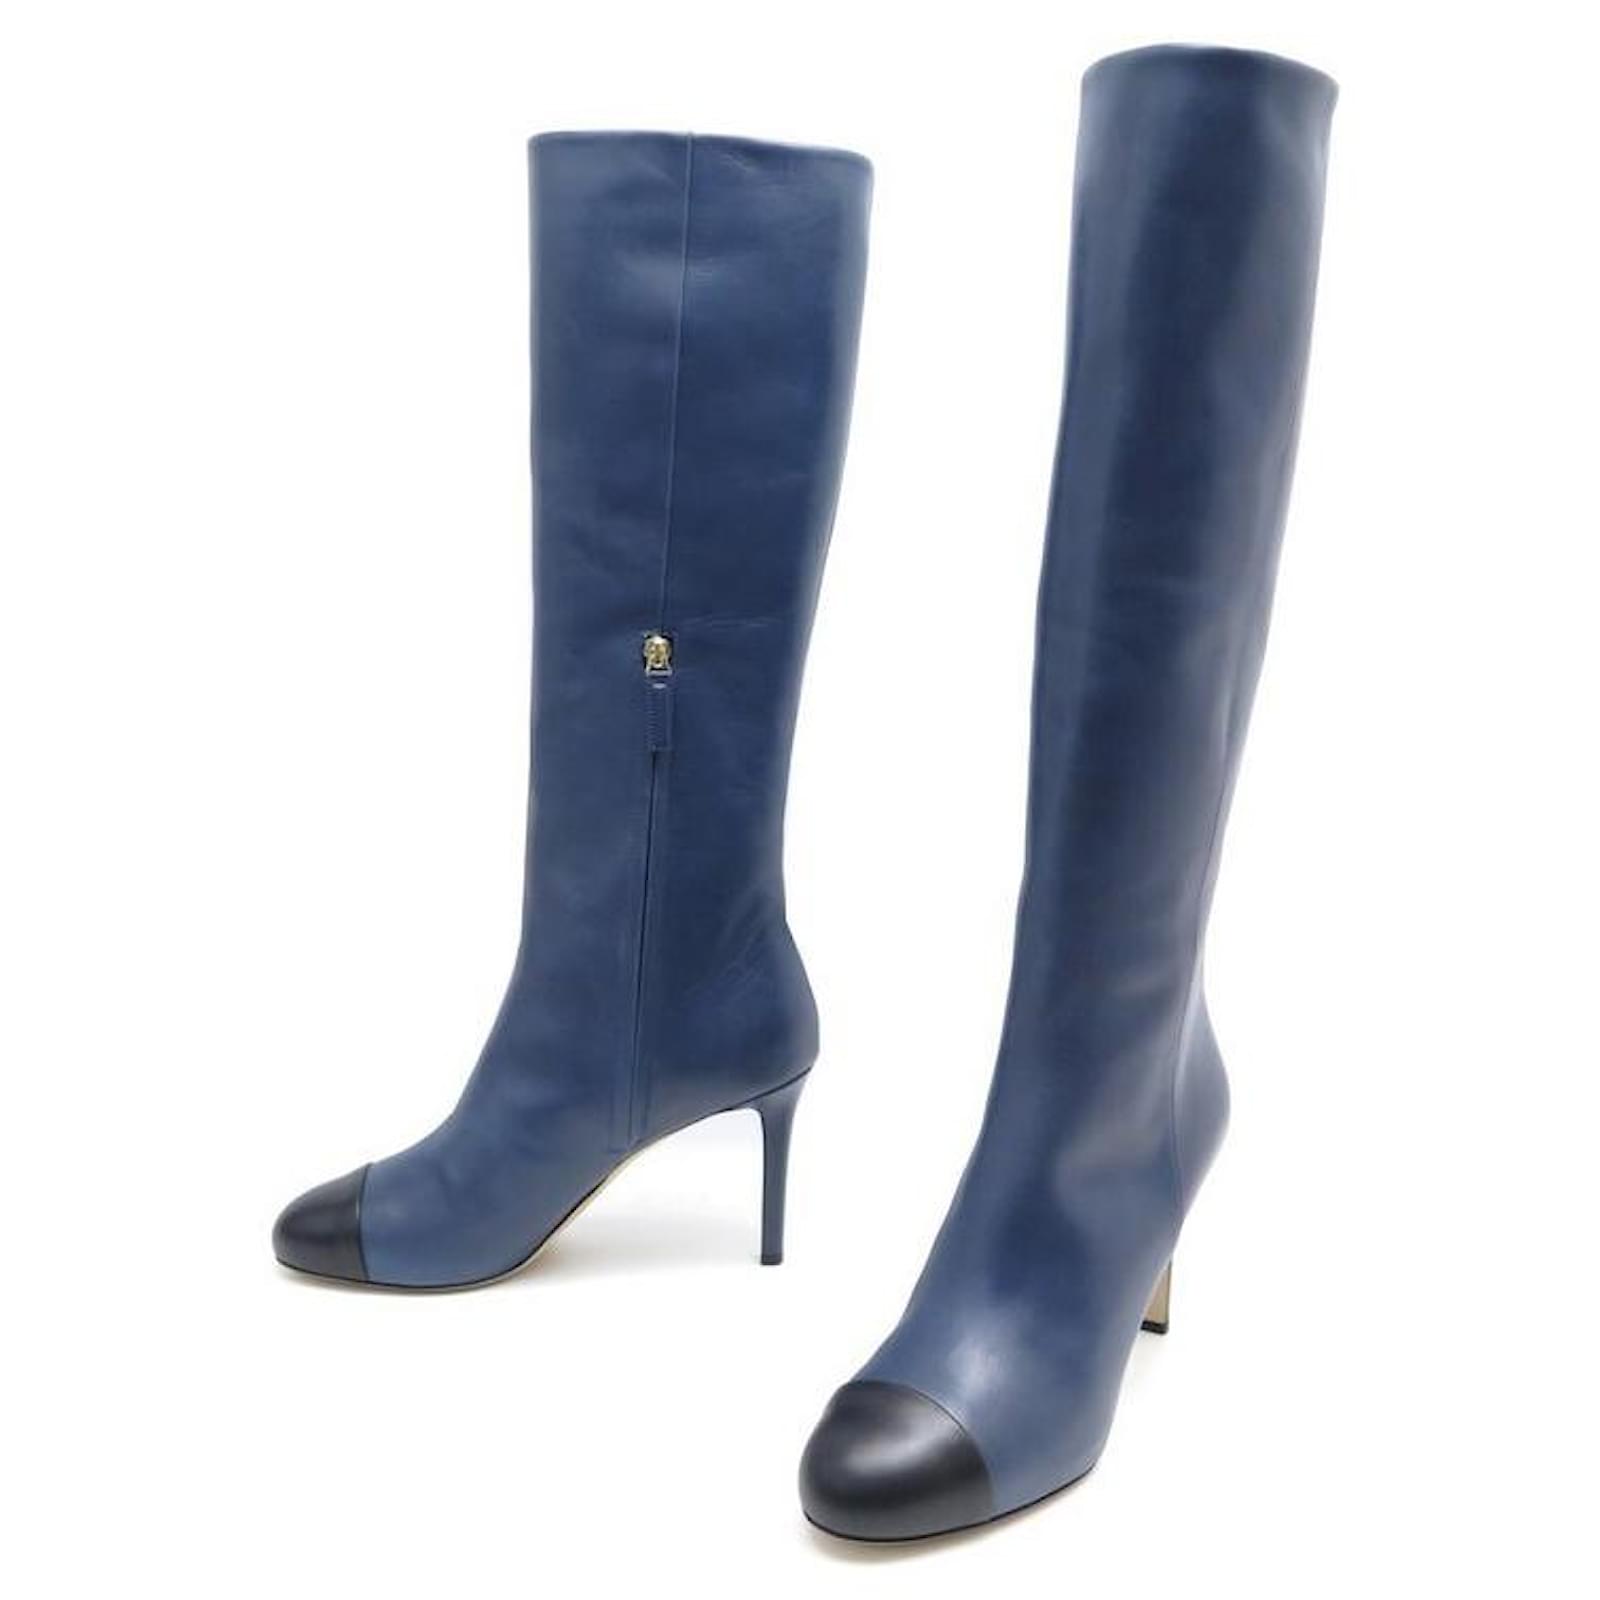 NEW CHANEL BOOTS WITH G HEELS33566 40 BLUE LEATHER BOOTS SHOES  -  Joli Closet